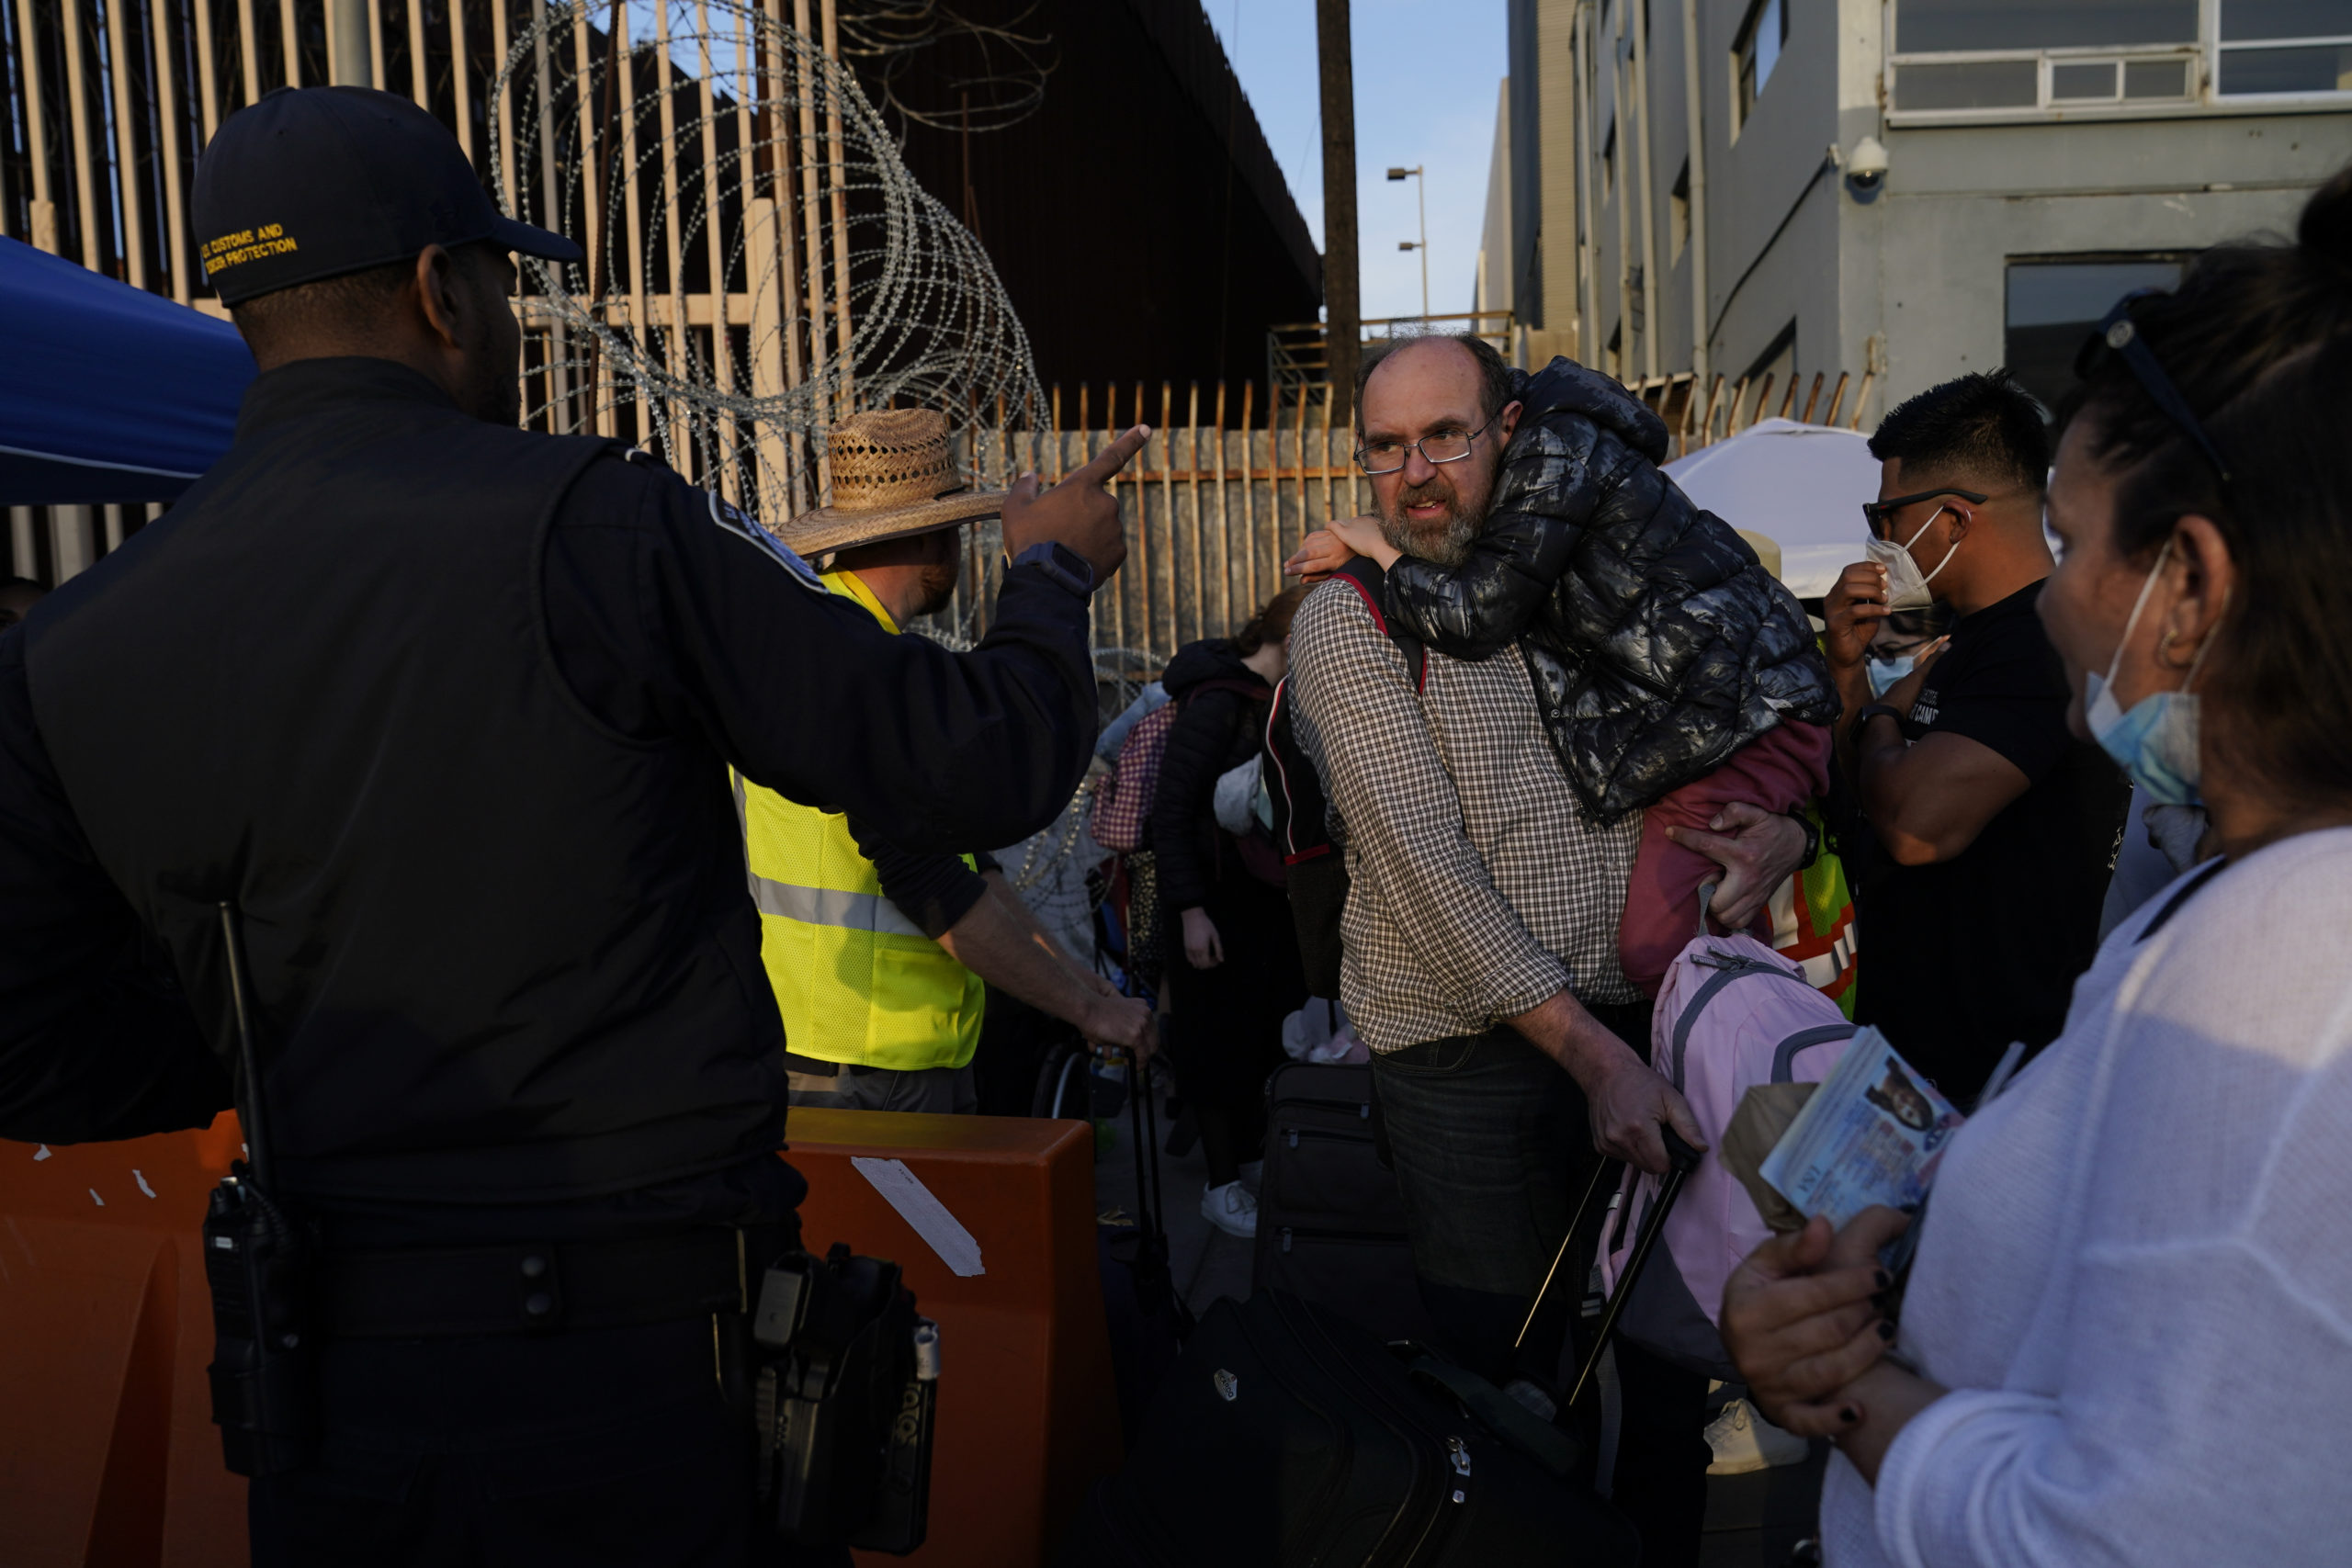 Ukrainian refugees speak with a U.S. Customs and Border Protection official as the refugees prepare to cross the border on April 4, 2022, in Tijuana, Mexico.